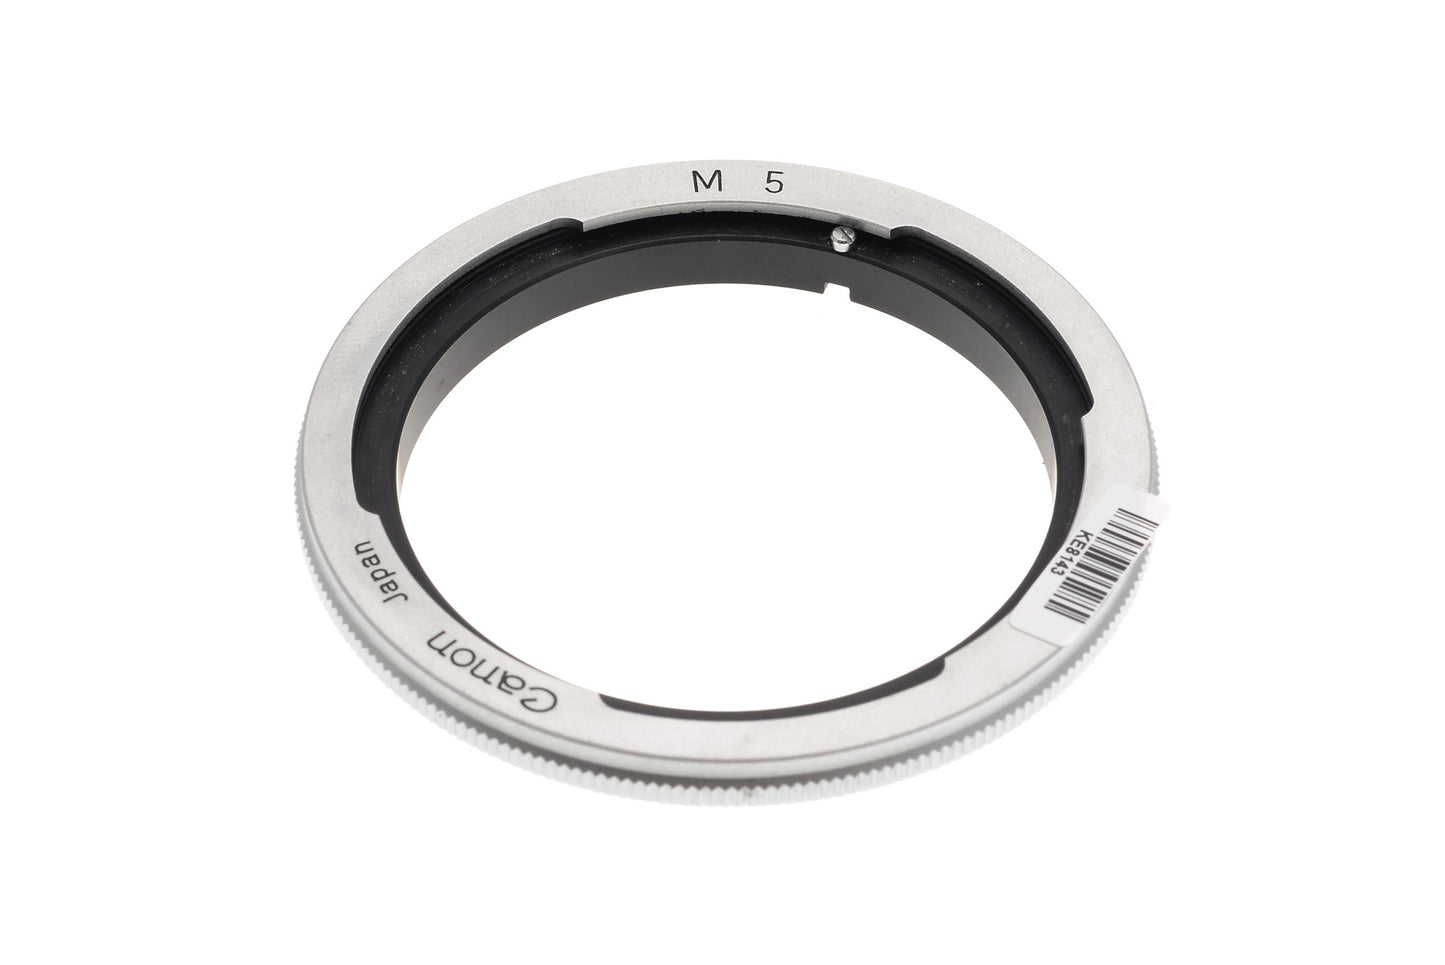 Canon M5 Extension Tube